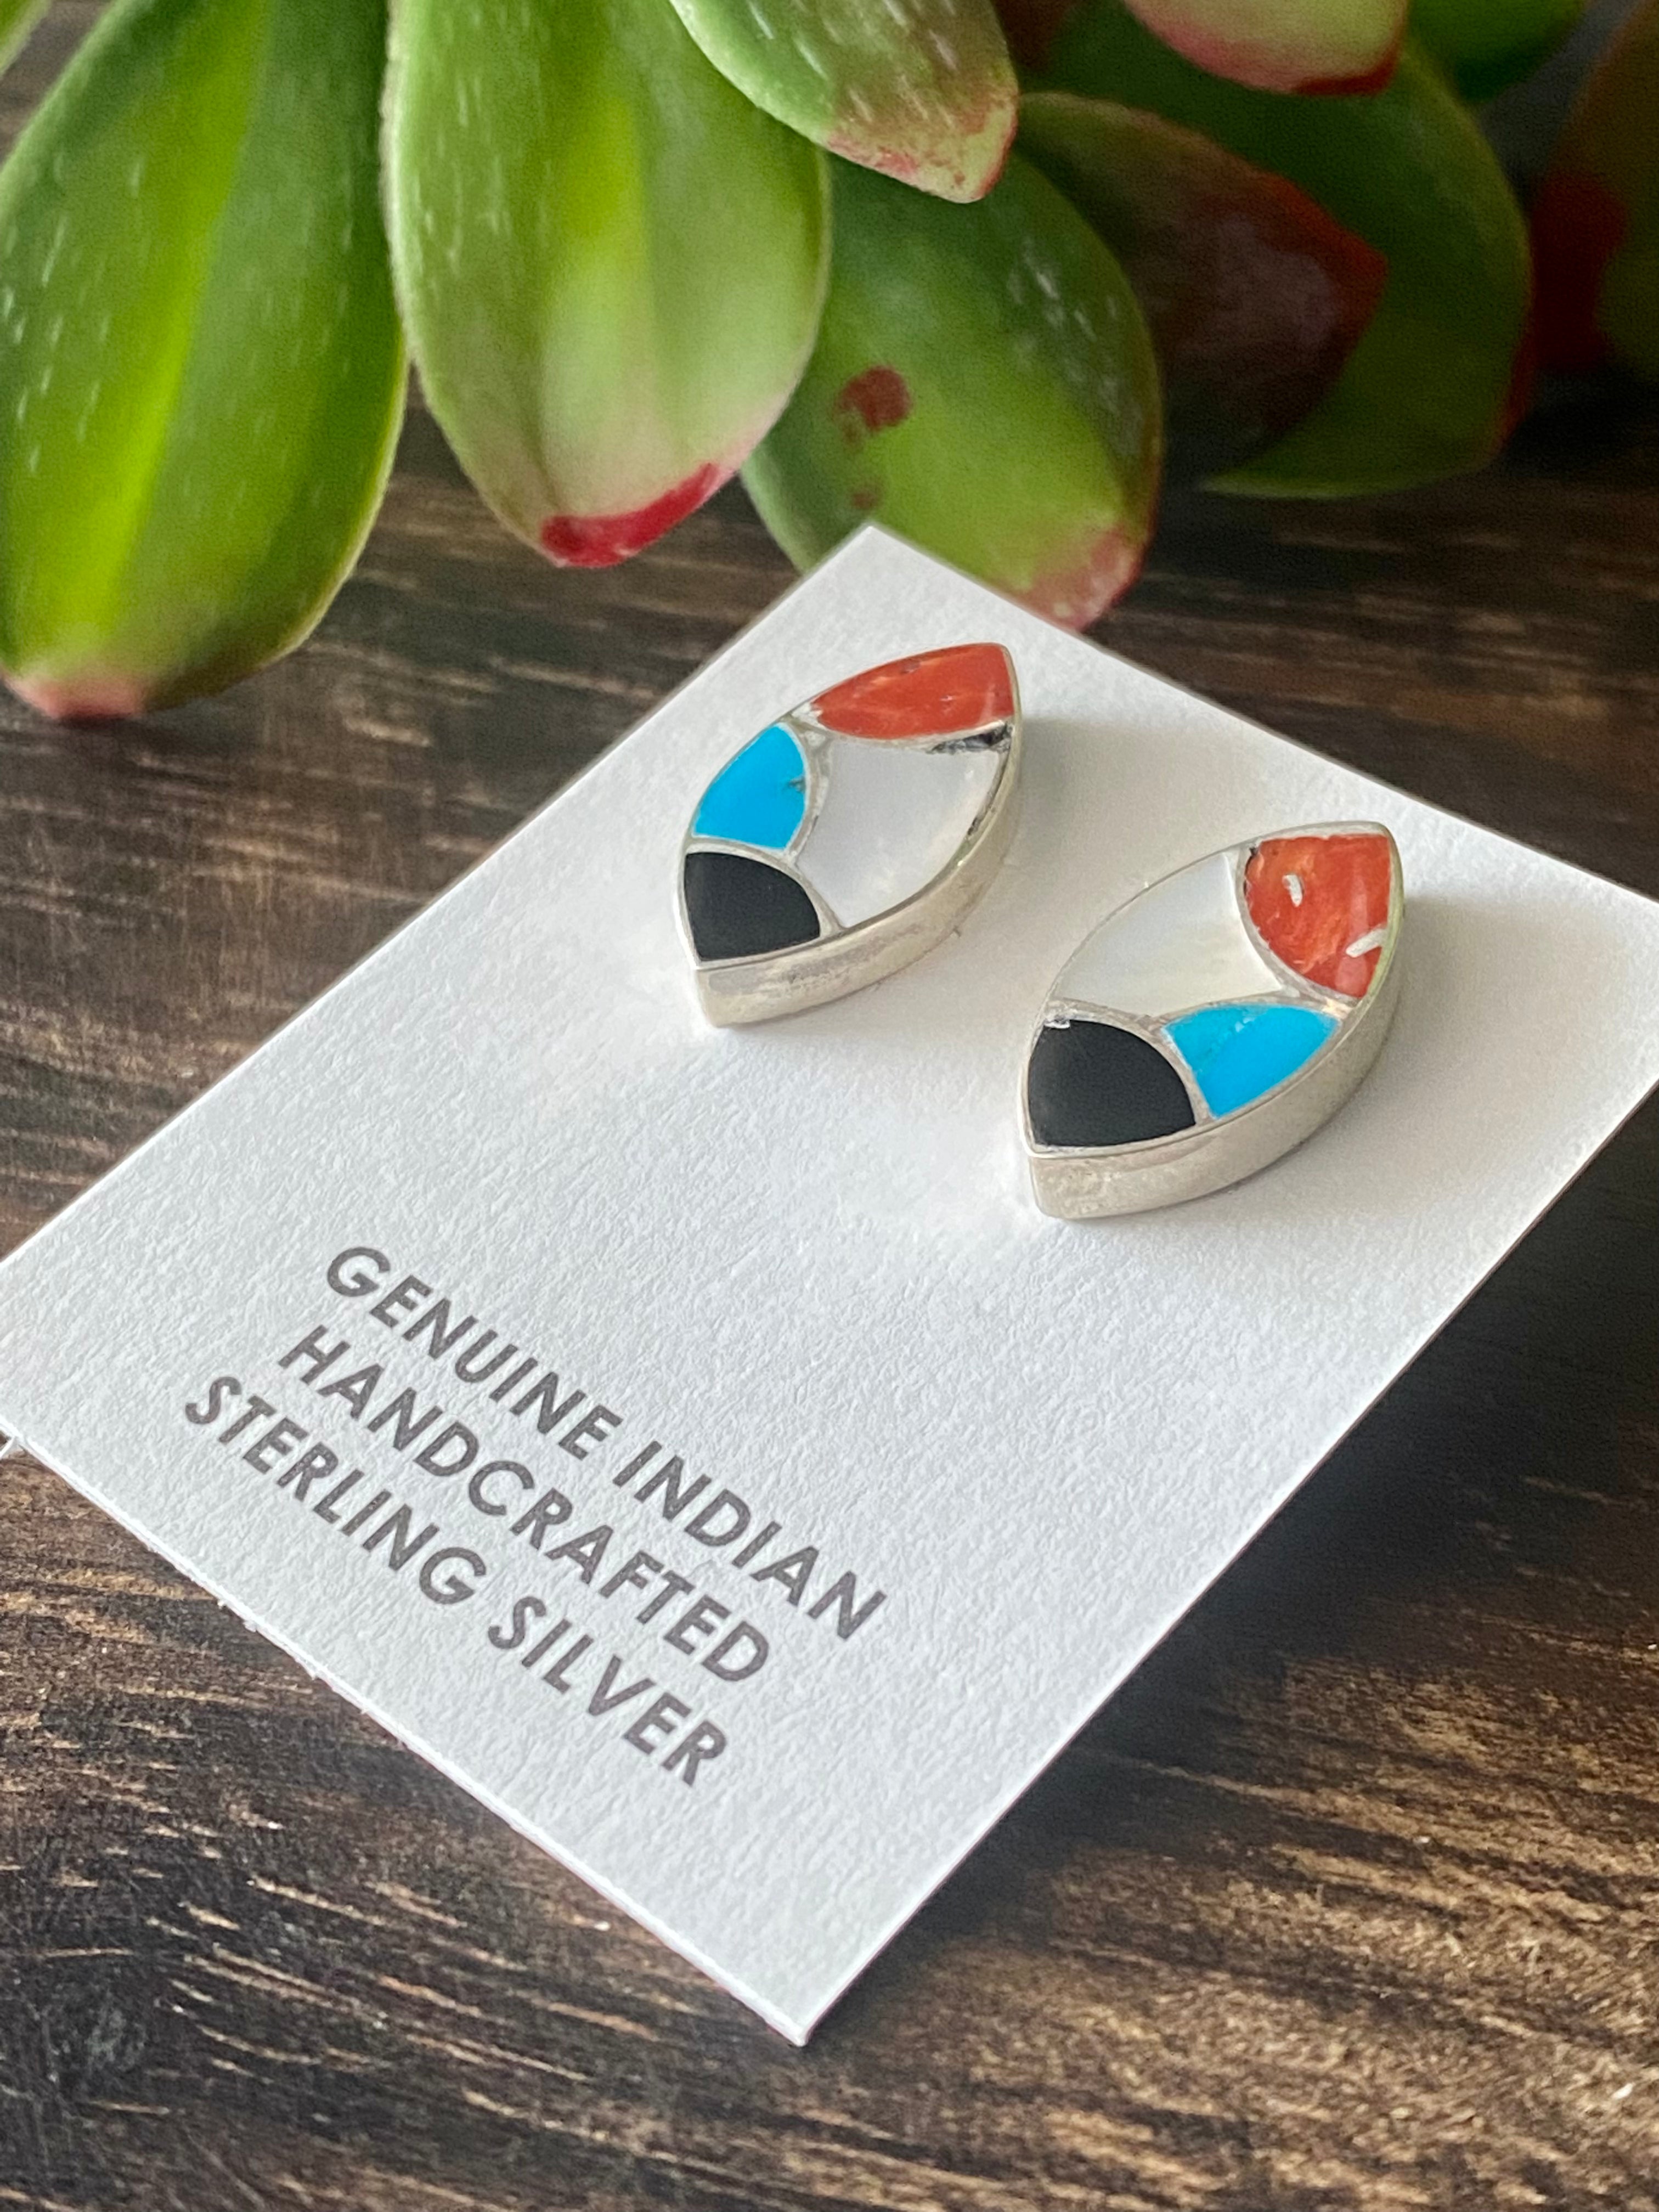 Carmicael Haloo Multi Stone & Sterling Silver Inlay Post Earrings